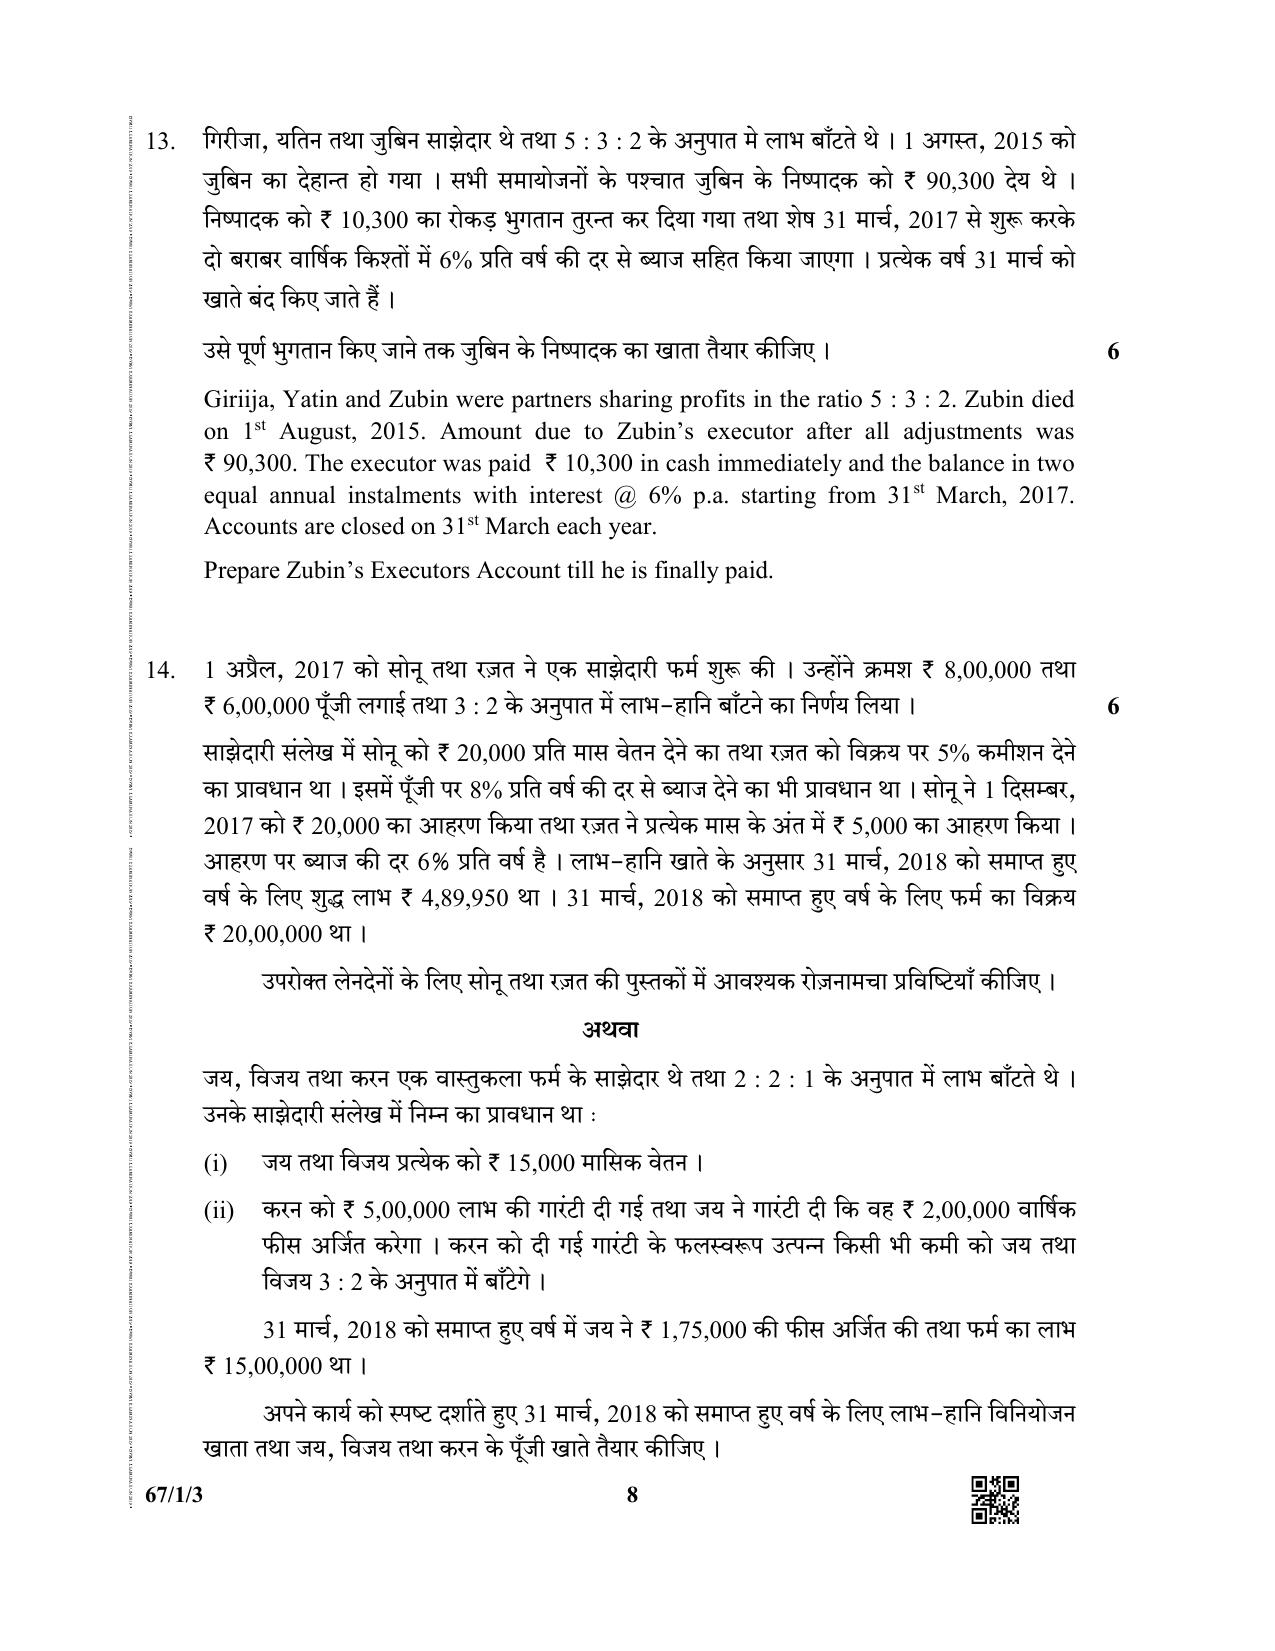 CBSE Class 12 67-1-3  (Accountancy) 2019 Question Paper - Page 8